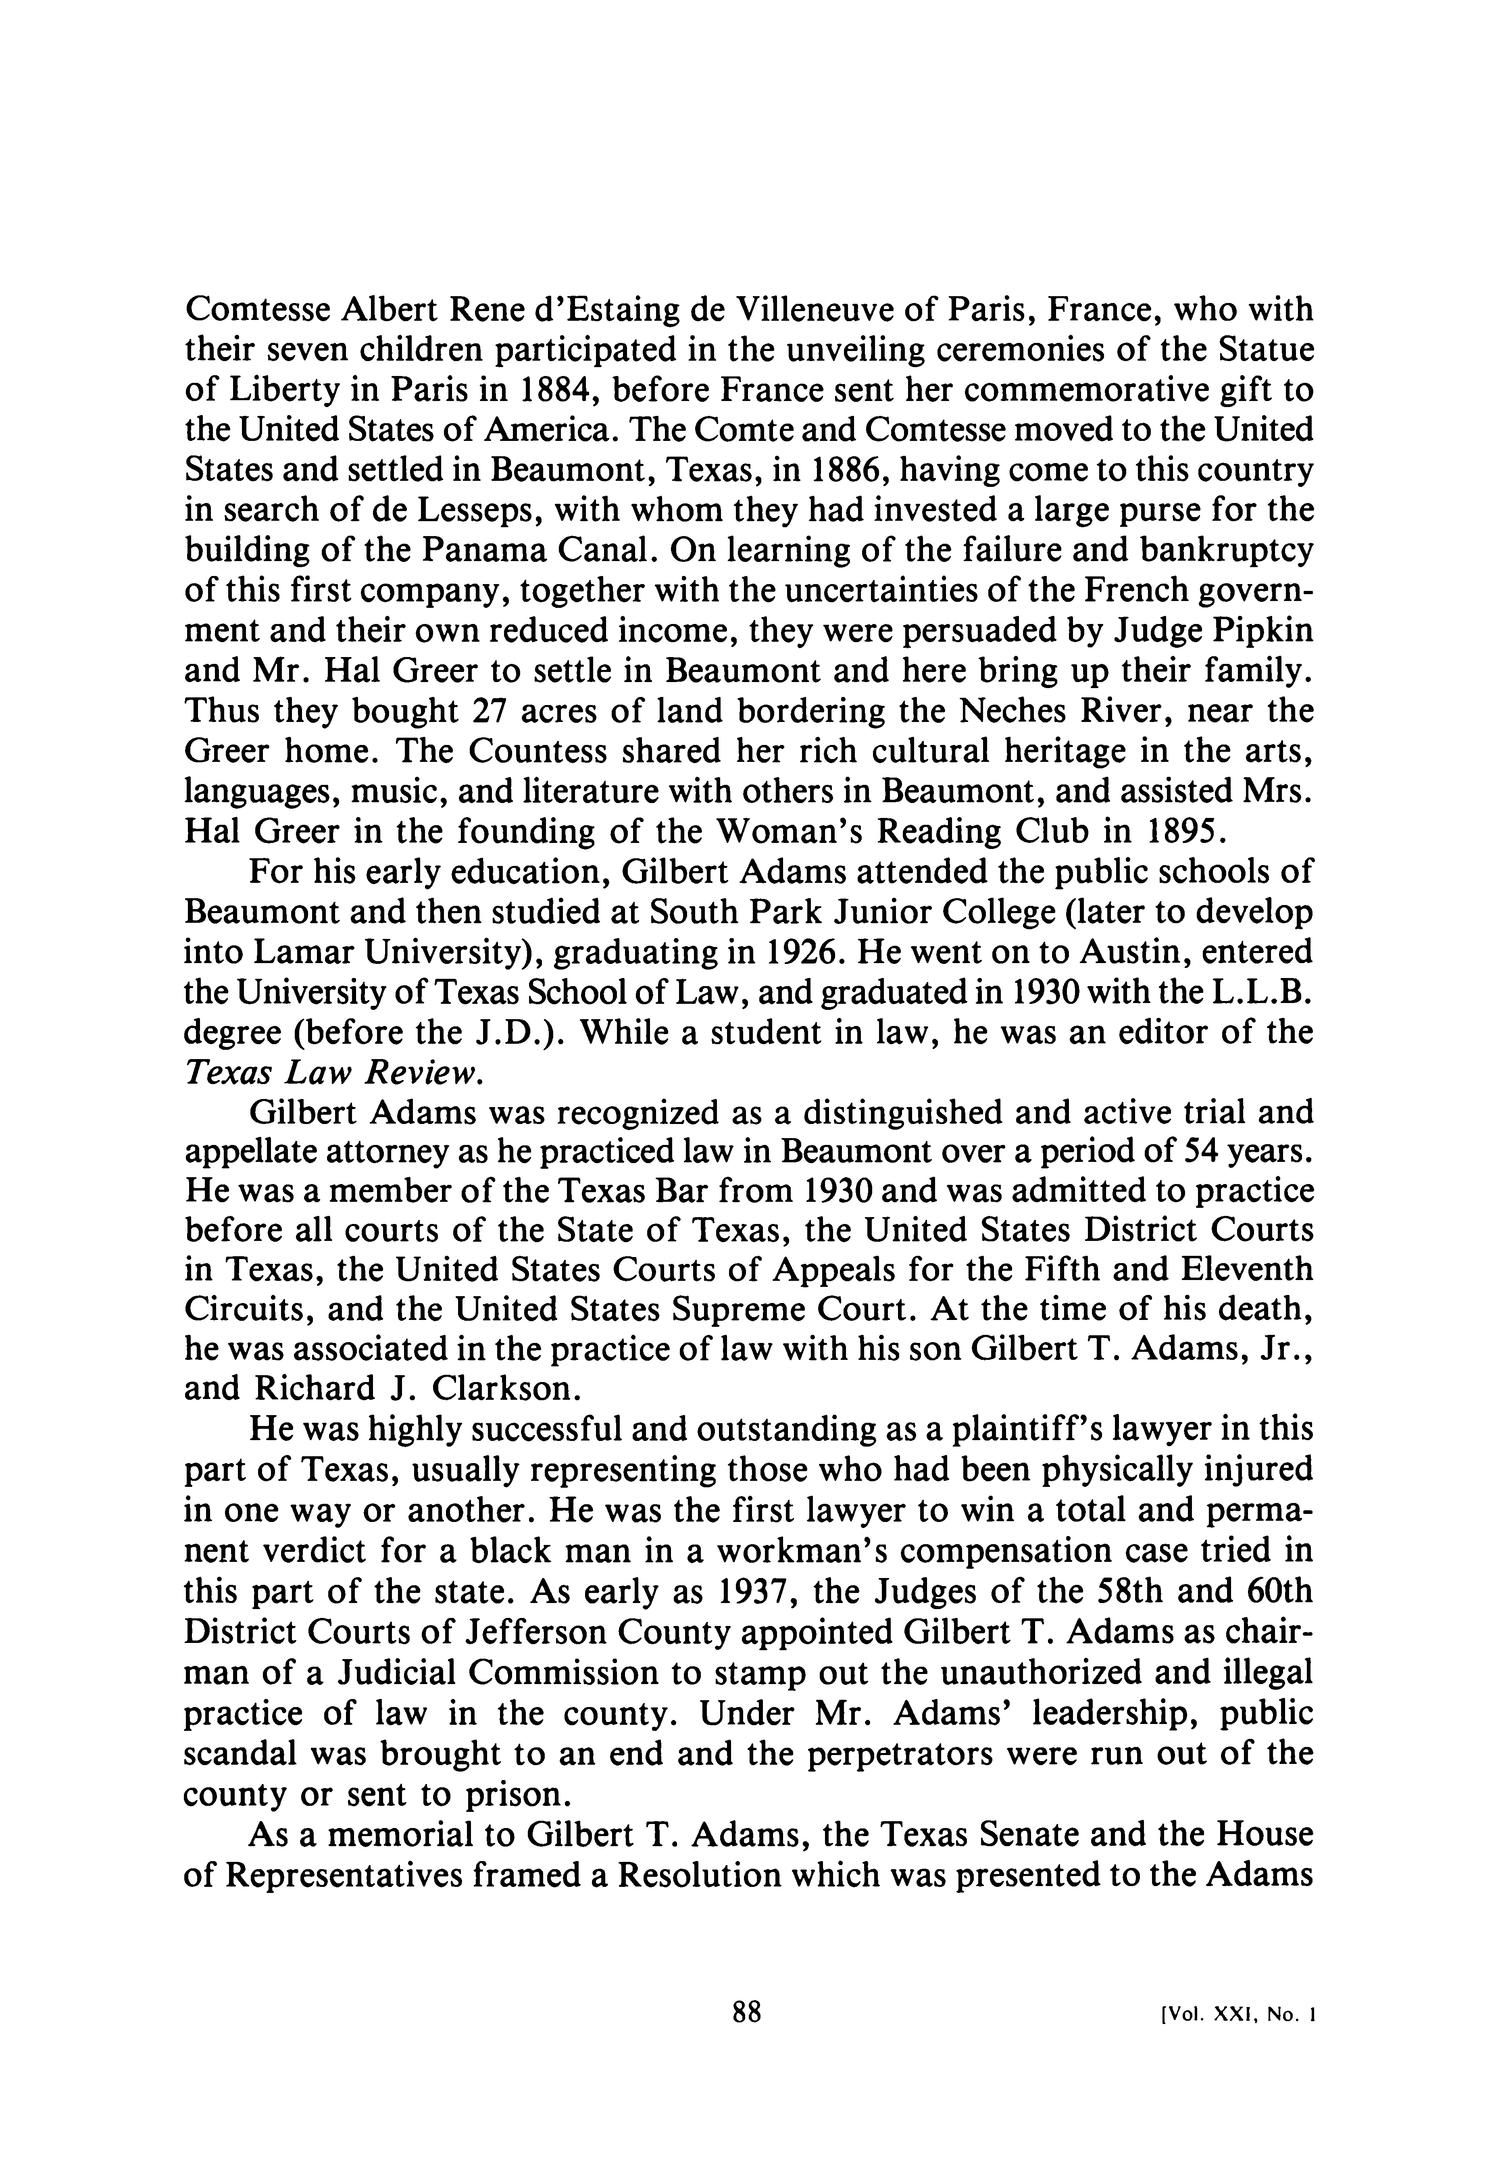 The Texas Gulf Historical and Biographical Record, Volume 21, Number 1, November 1985
                                                
                                                    88
                                                